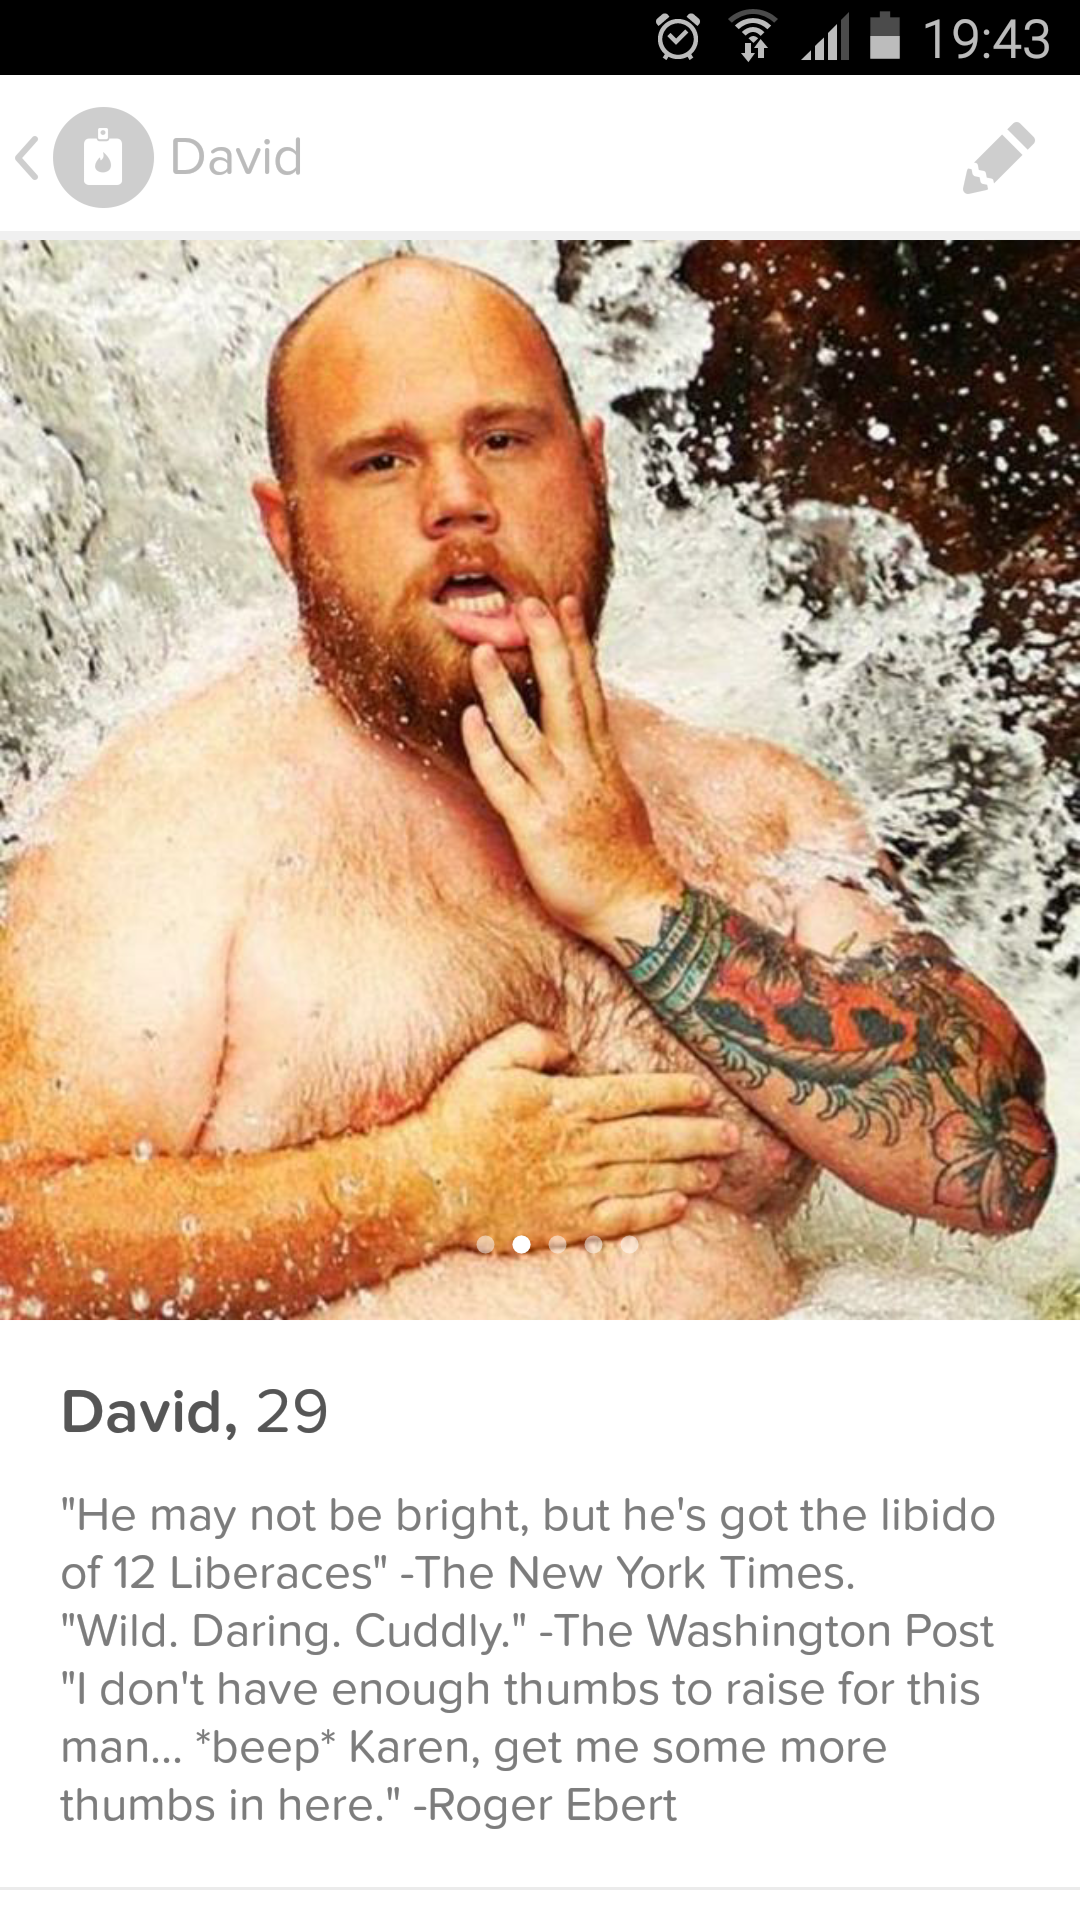 random pic tinder fake profiles funny - 0 David David, 29 "He may not be bright, but he's got the libido of 12 Liberaces The New York Times. "Wild. Daring. Cuddly." The Washington Post "I don't have enough thumbs to raise for this man...beep karen, get me